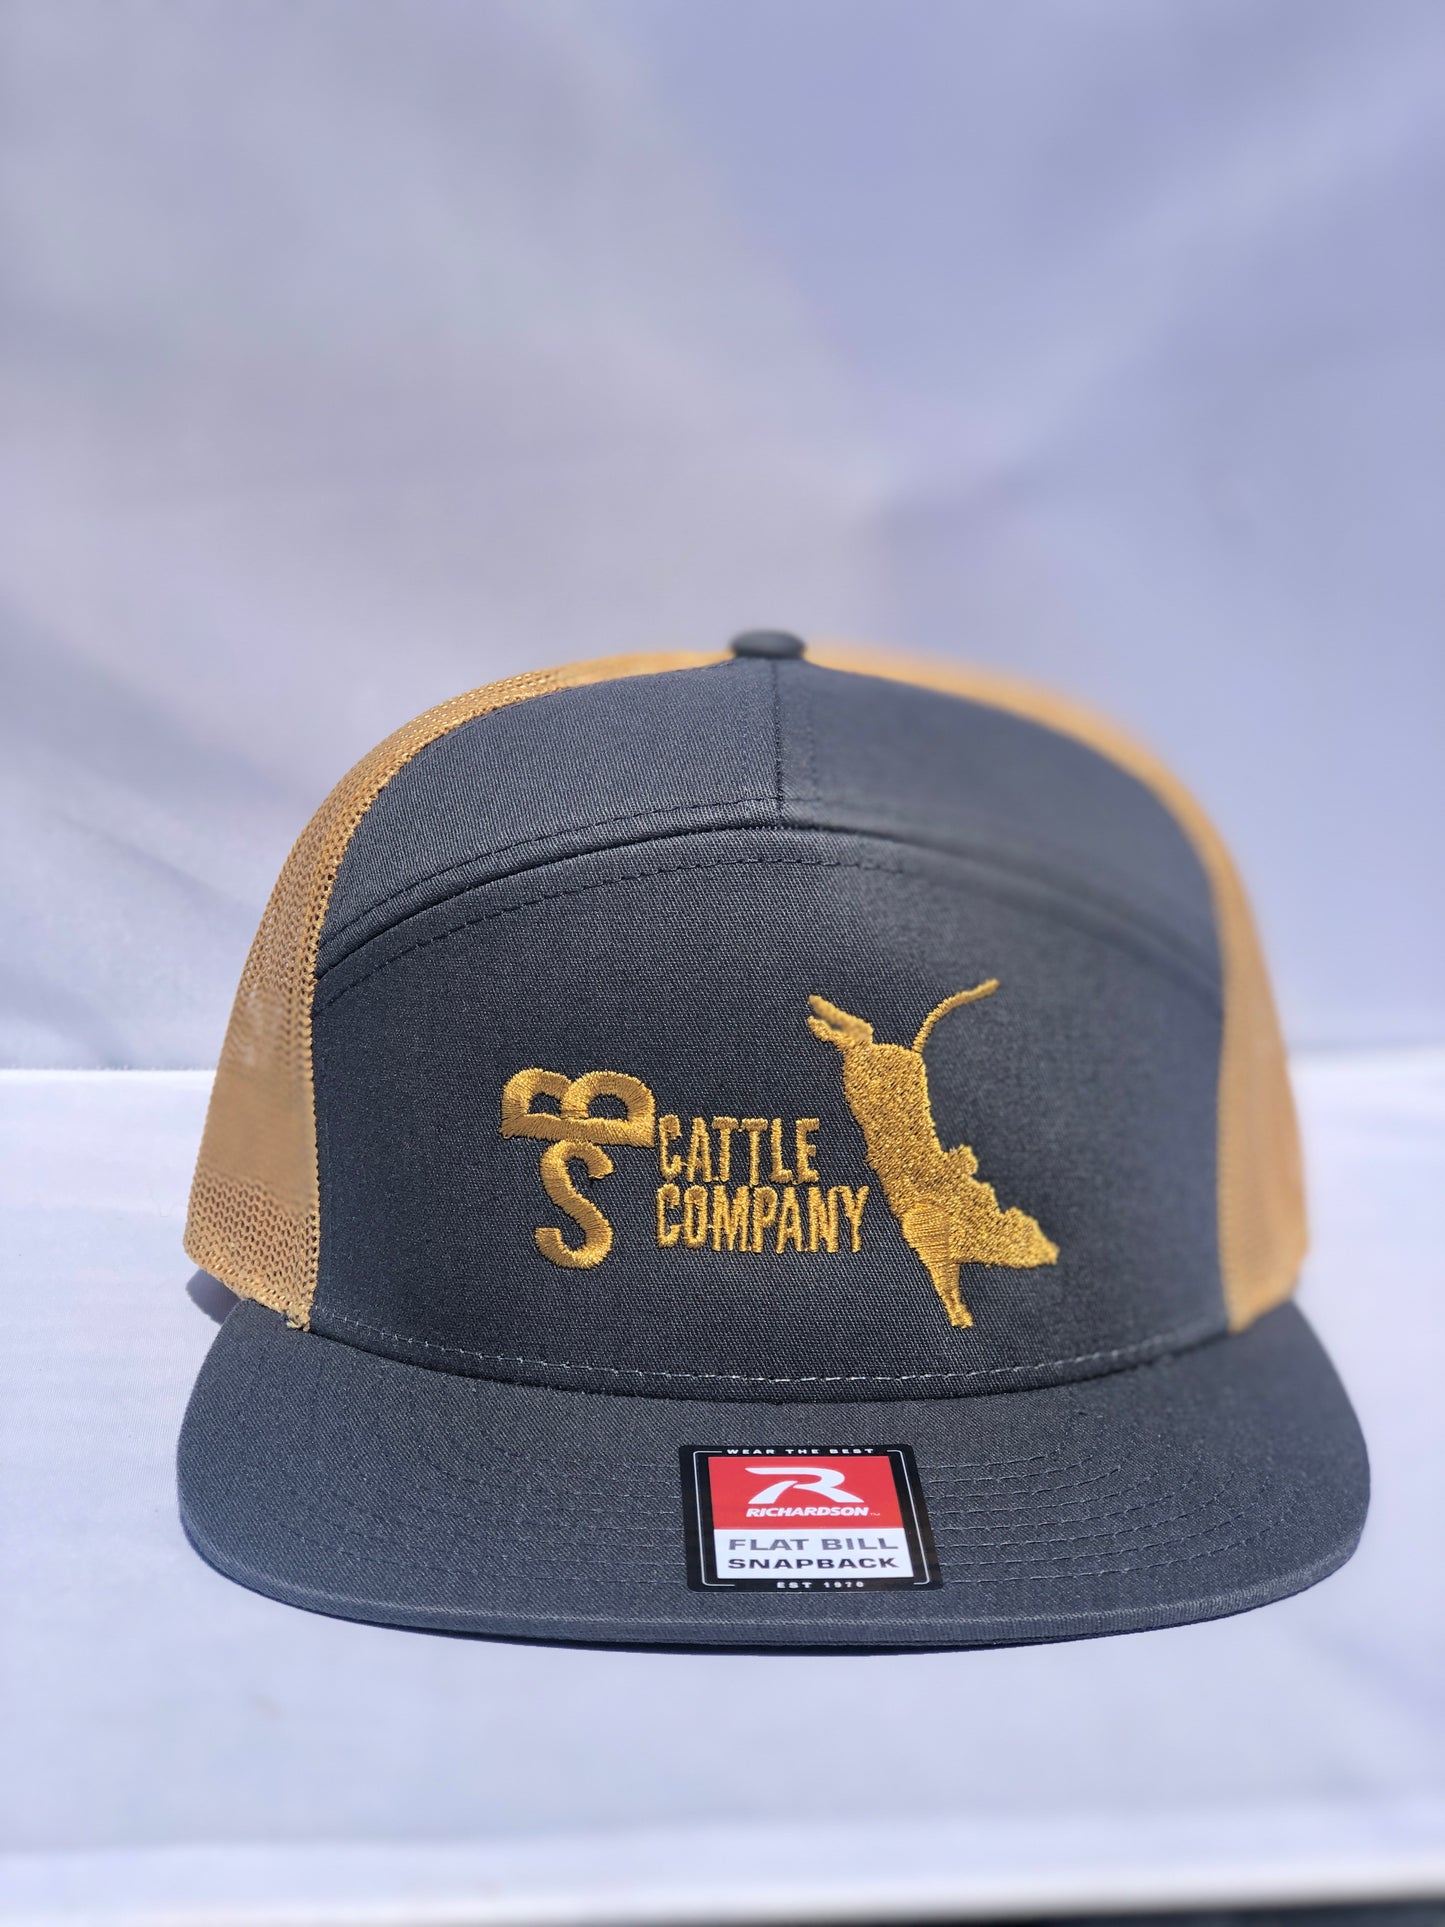 BS Cattle Charcoal and Gold